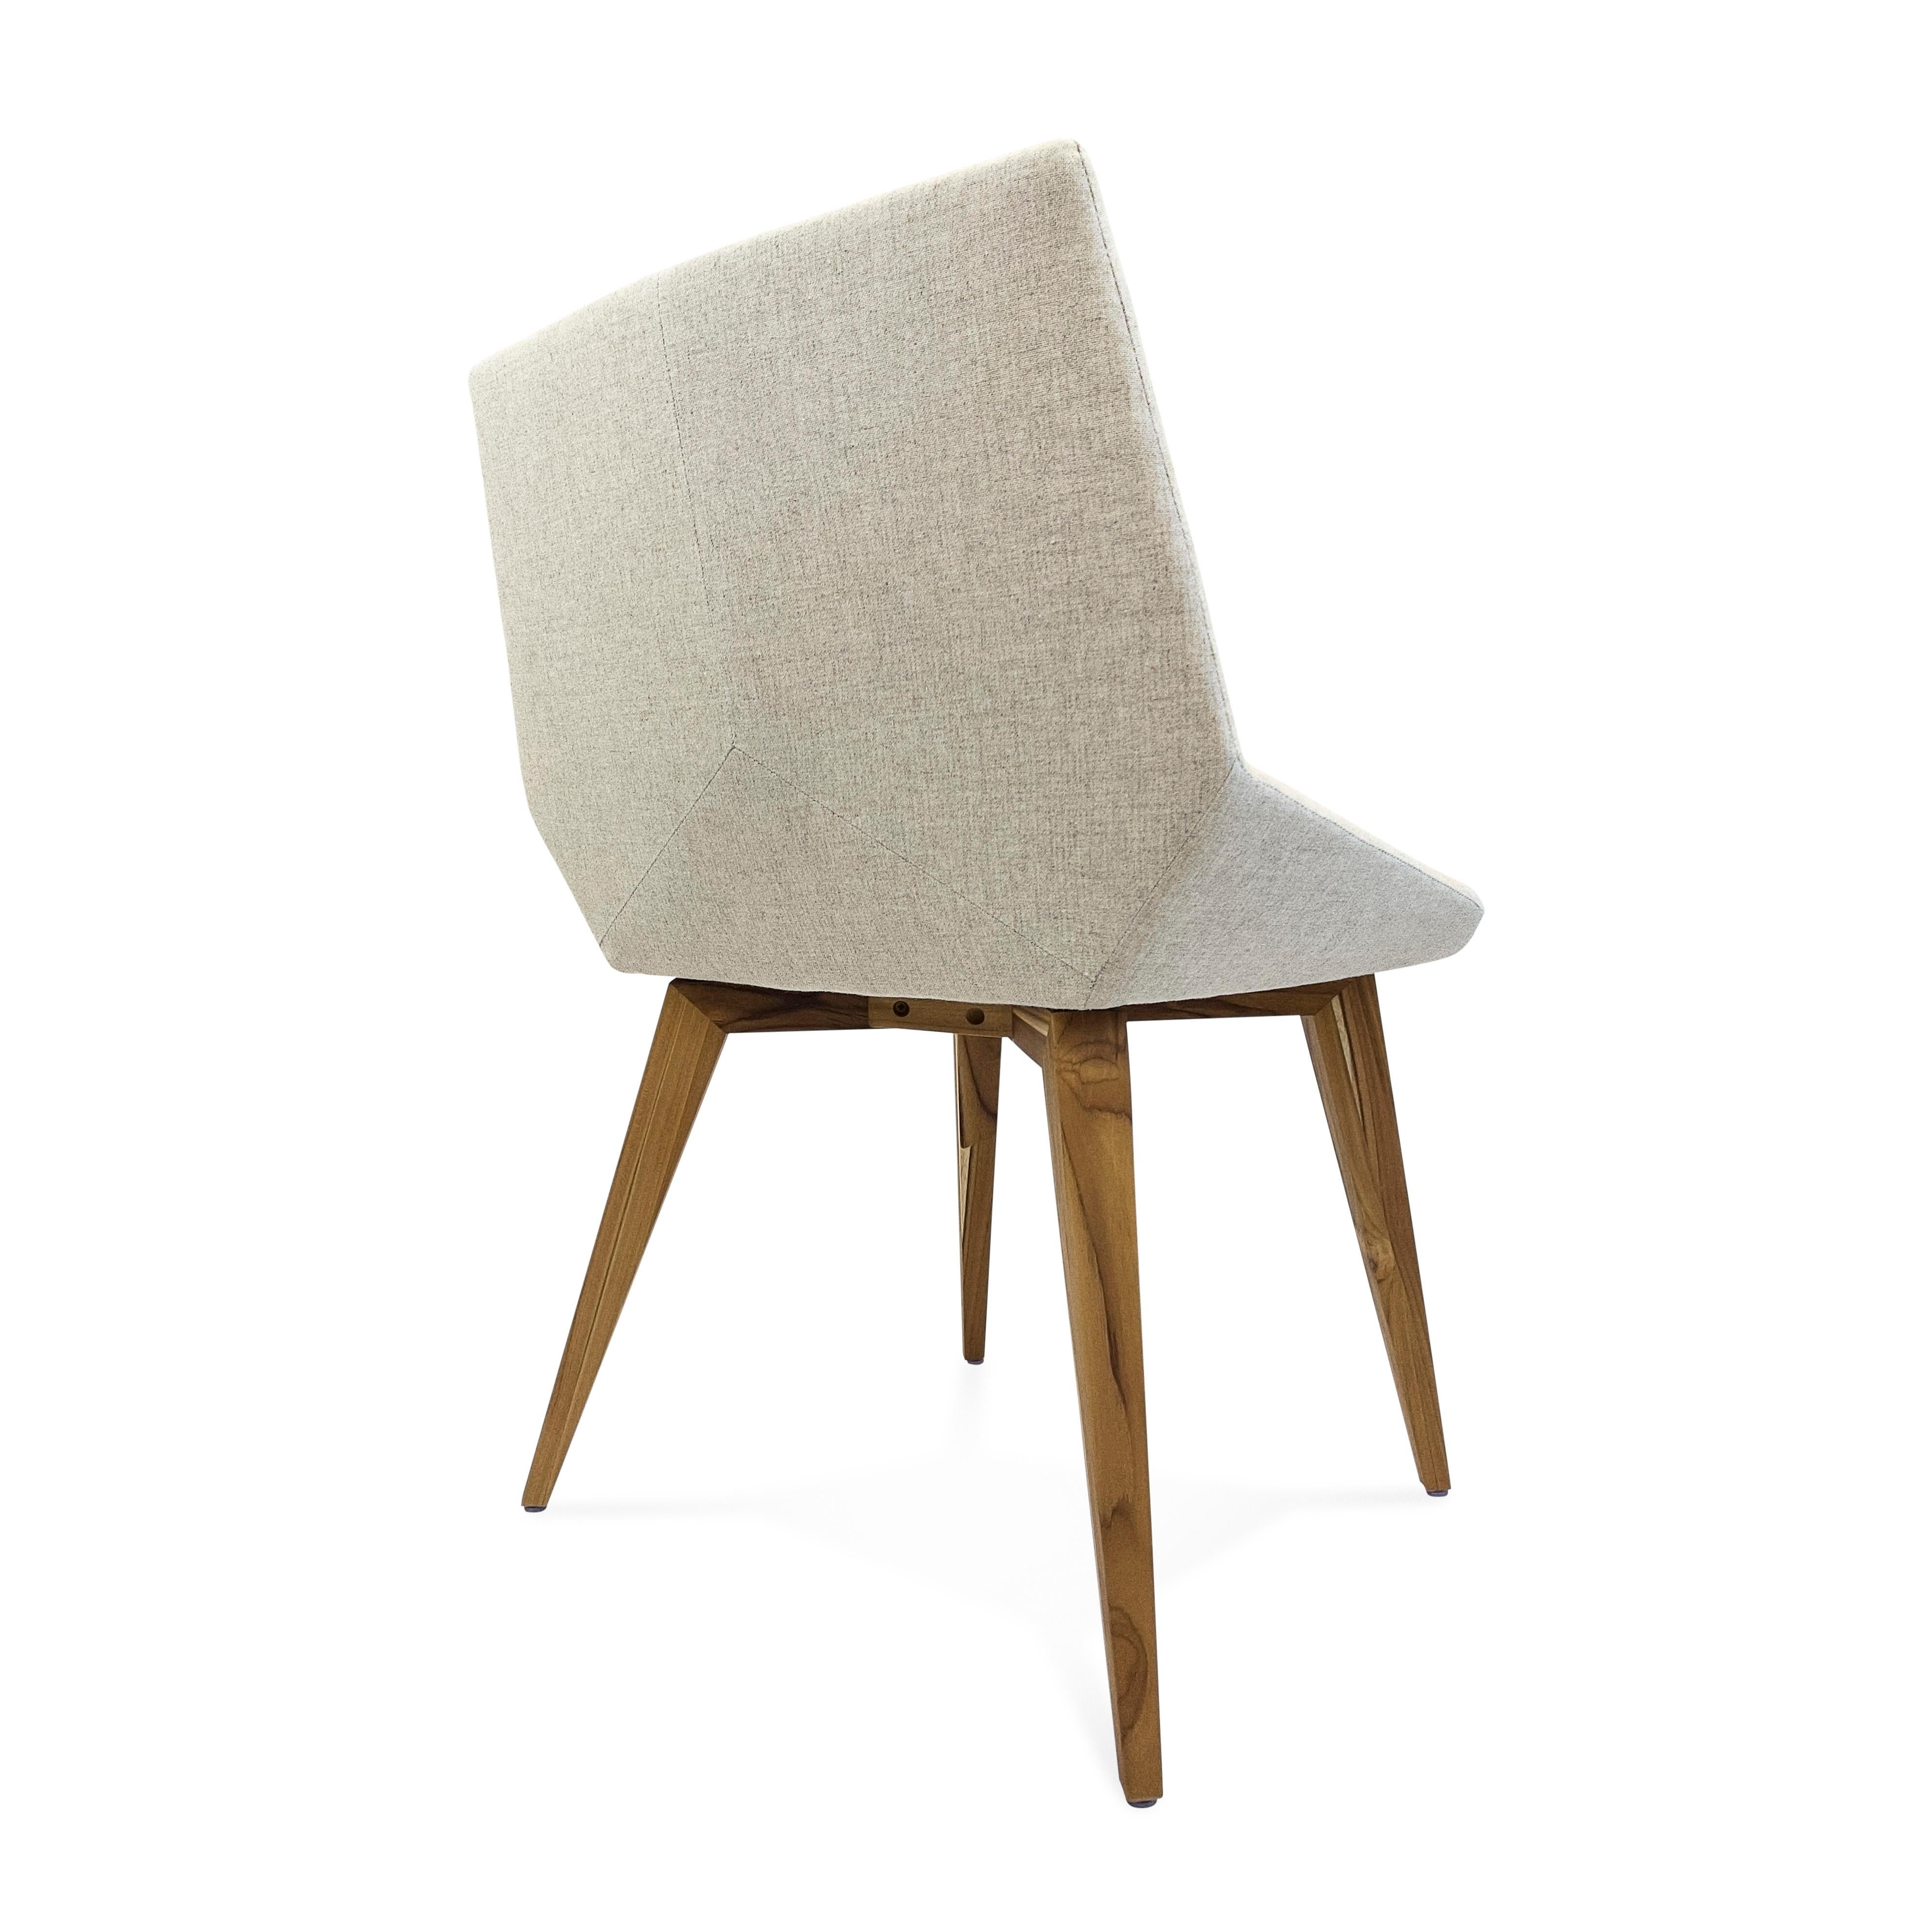 Geometric Cubi Dining Chair in Teak Wood Finish with Oatmeal Fabric Seat In New Condition For Sale In Miami, FL